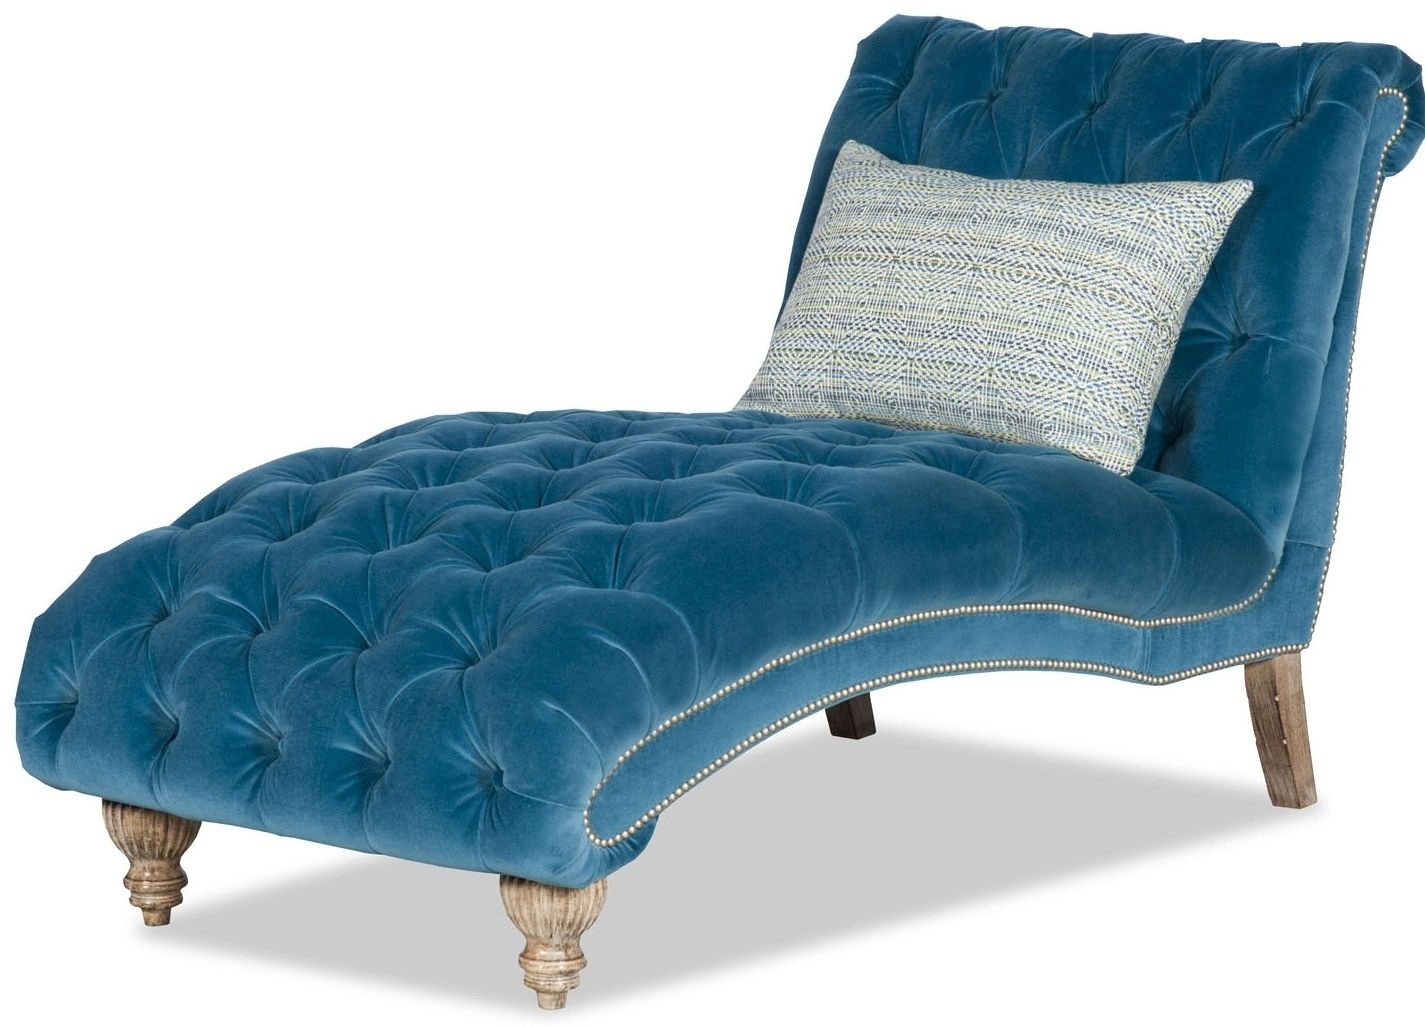 Most Recently Released Peacock Blue Chaise Lounge In Chaise Benchs (View 11 of 15)